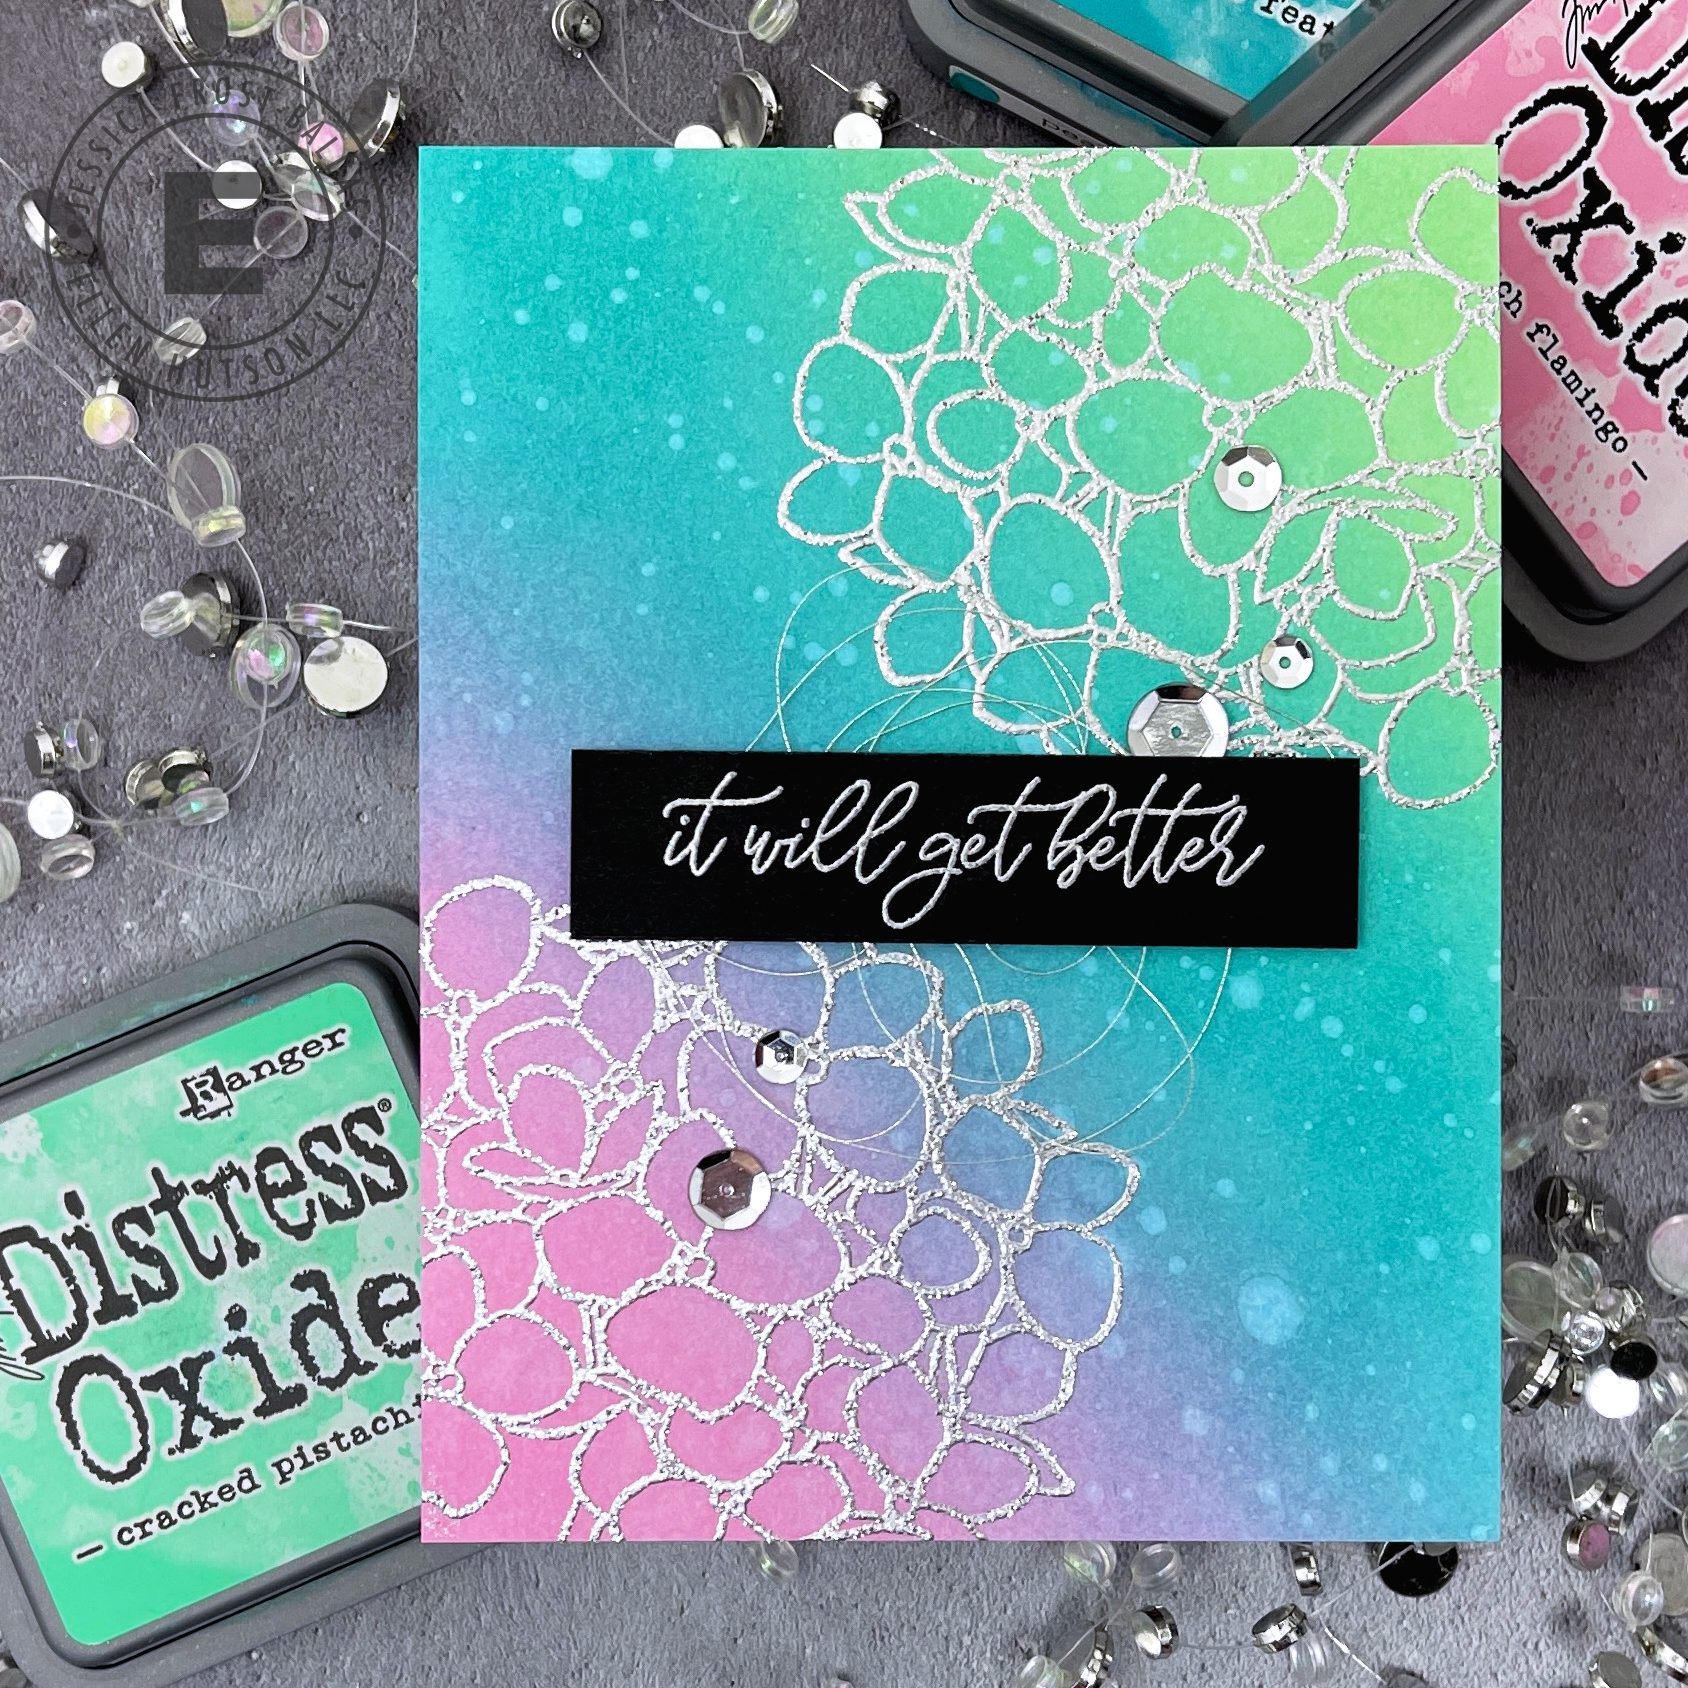 VIDEO: Distress Oxide Ink Blending Combinations and Swatch Book - all the  sparkle